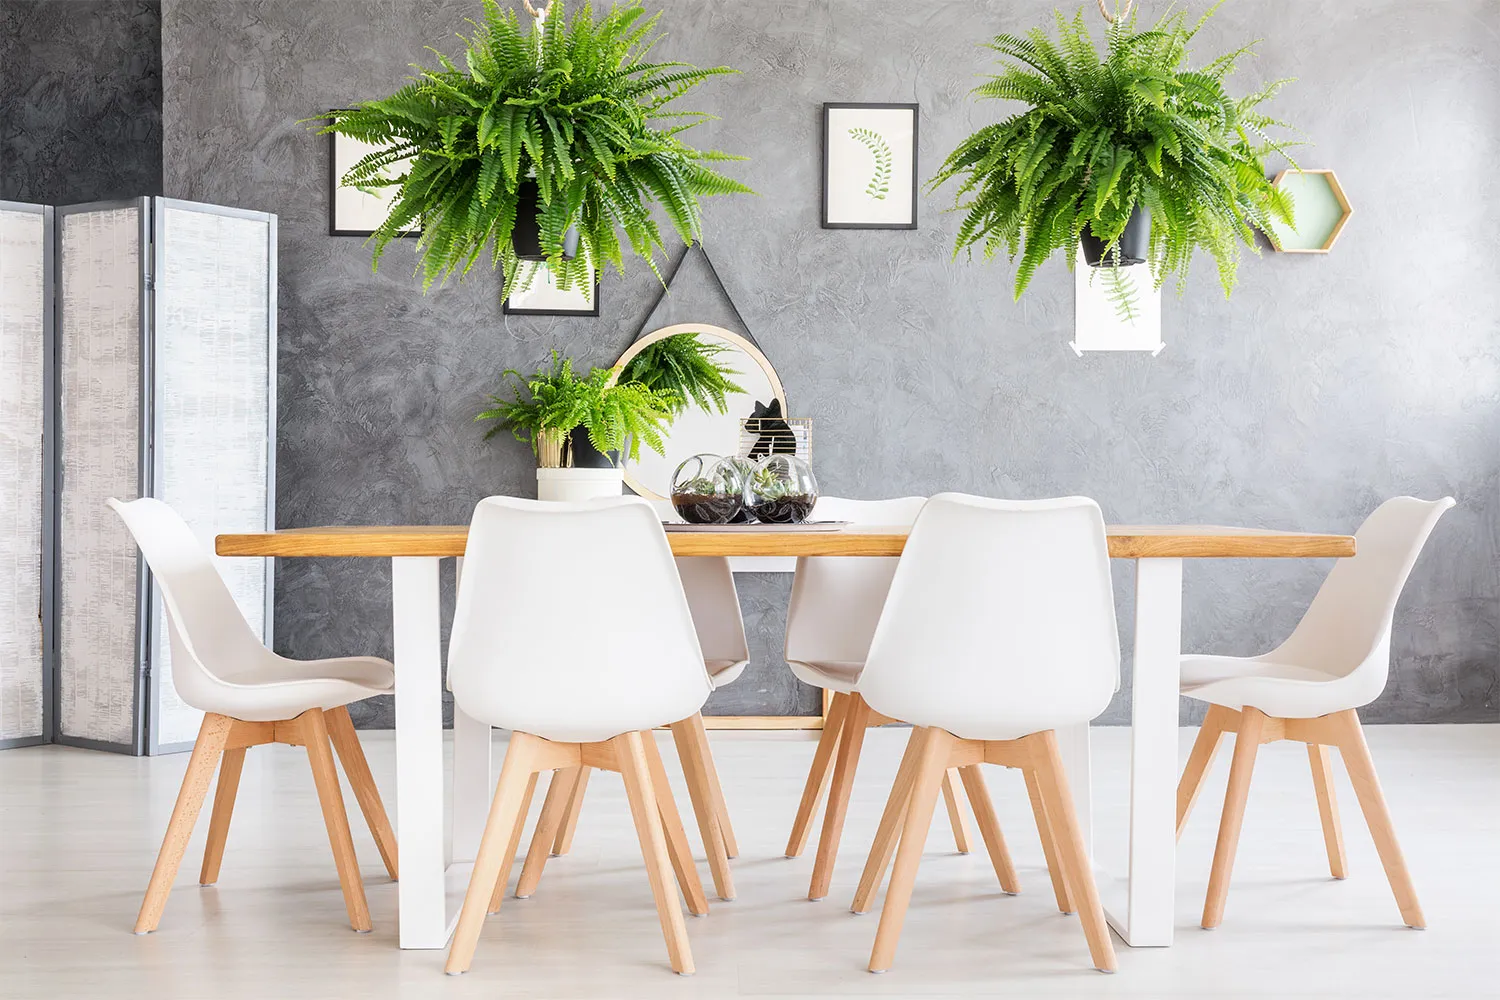 Modern dining room with hanging ferns and minimalist decor.